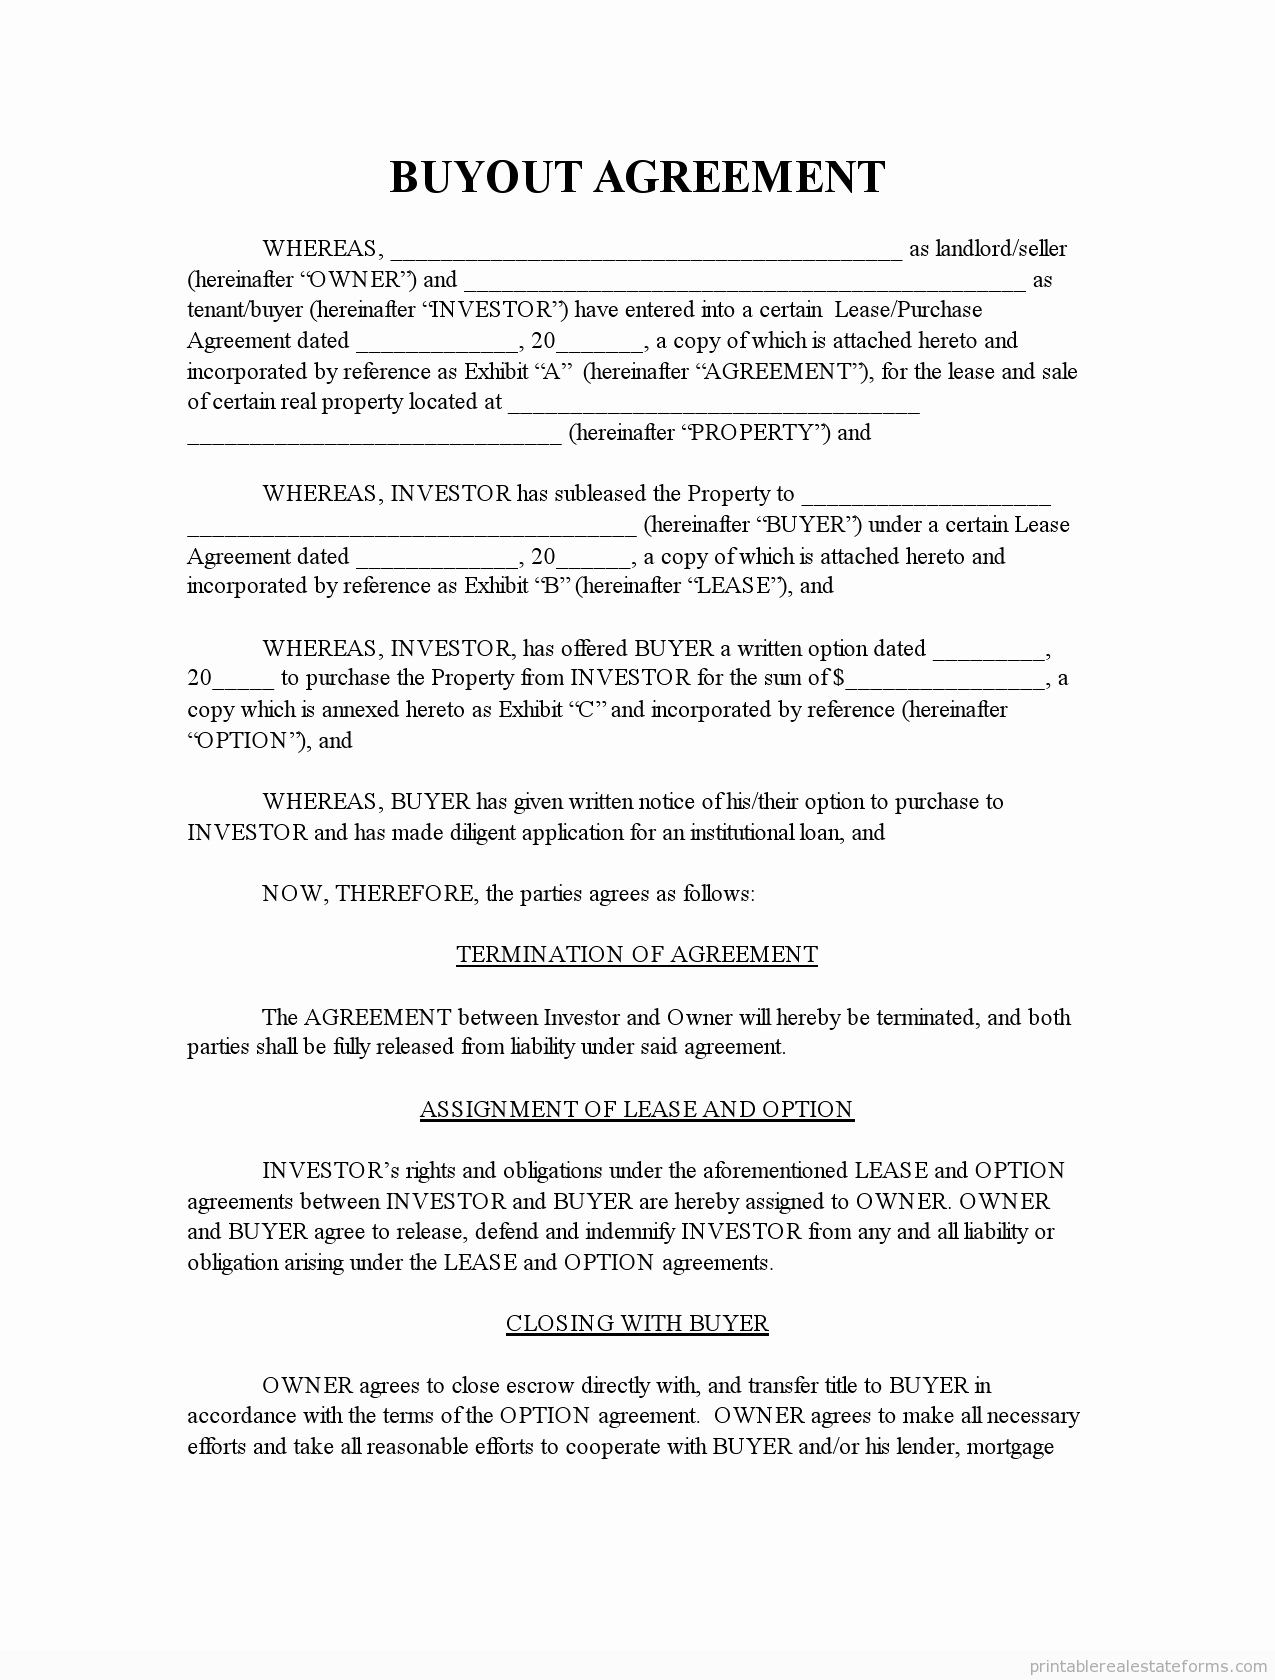 Home Buyout Agreement Best Of Free Buyout Agreement Template form Real Estate Pdf